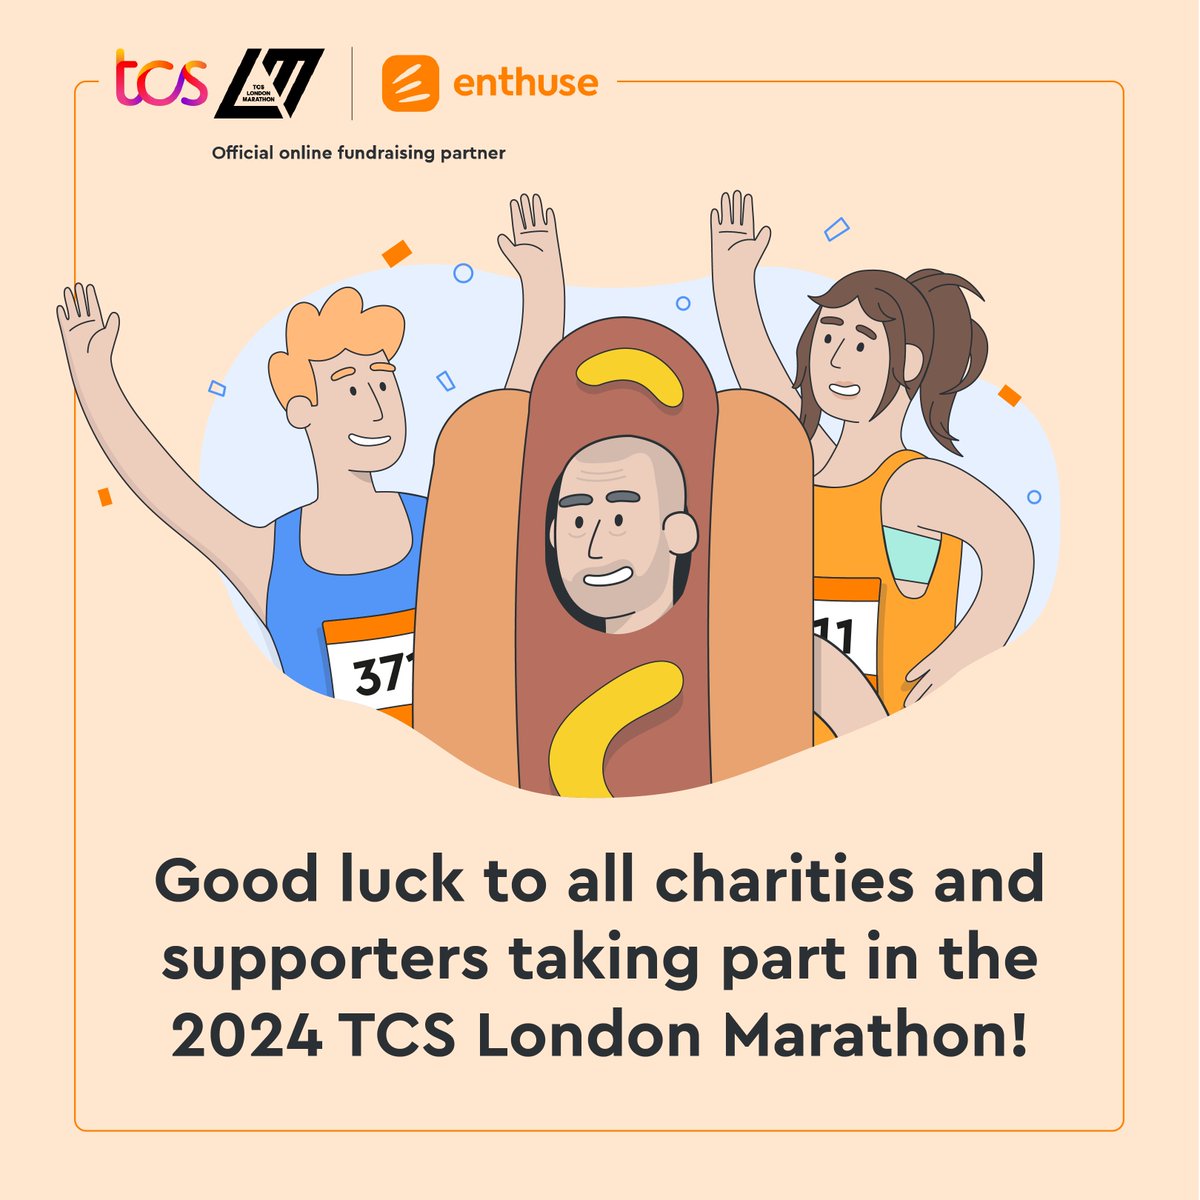 It’s nearly #LondonMarathon time! 🏅 The world’s biggest one-day fundraising event is just around the corner and as always, it promises to be a fantastic occasion! So all that’s left to say is good luck to all the charities taking part this year. Go well! 🧡